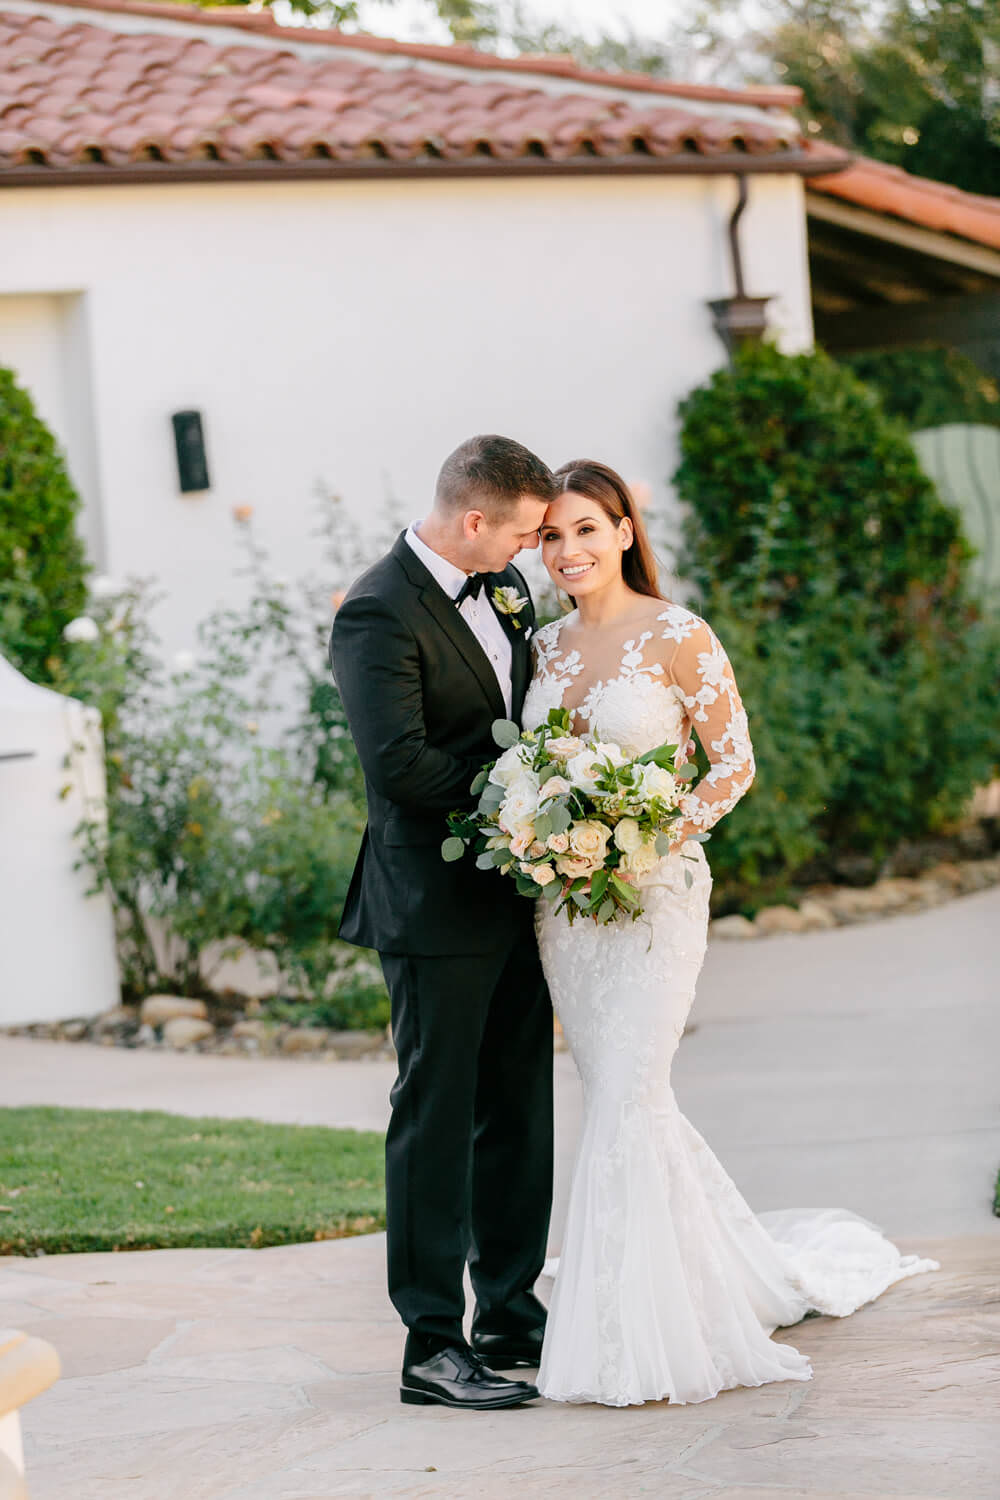 Bride and groom together at Ojai Vally inn featured venue